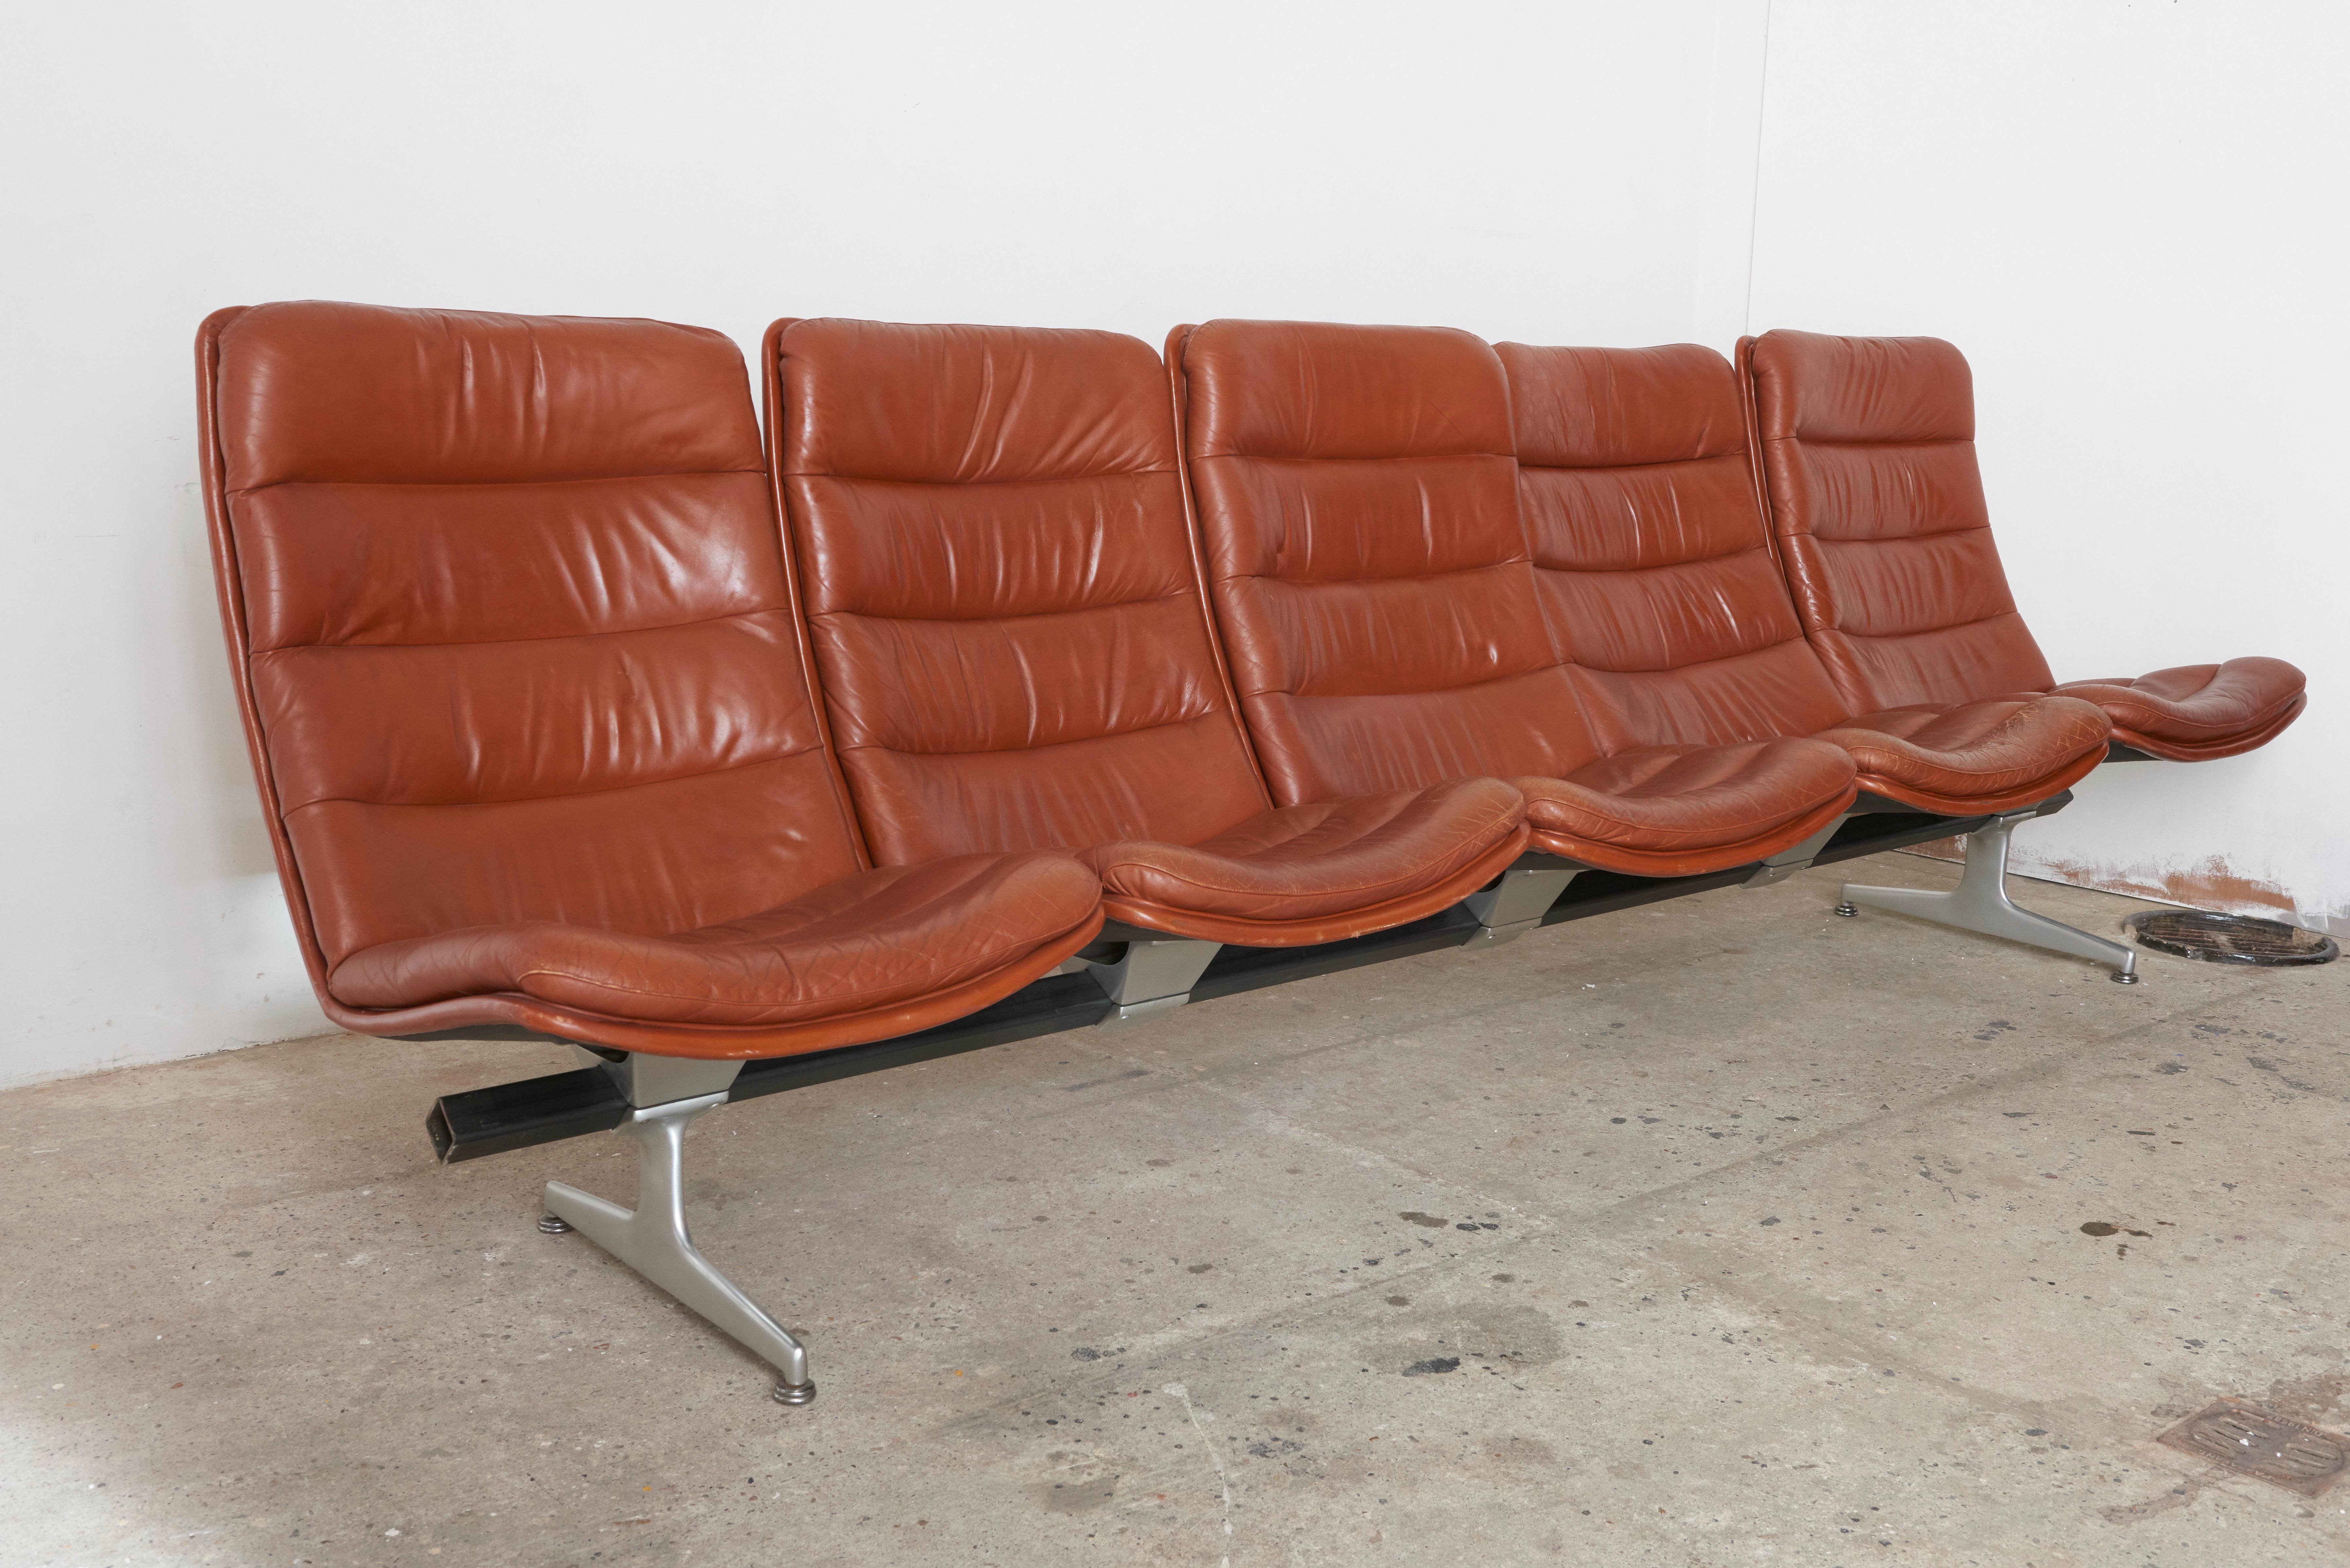 Timeless office or waiting area seating, designed in 1968 by Geoffrey D. Harcourt for Artifort. Five pieces of this modular multiple seating system, with cast aluminium leg frames and base plates which could be mounted on a steel beam set